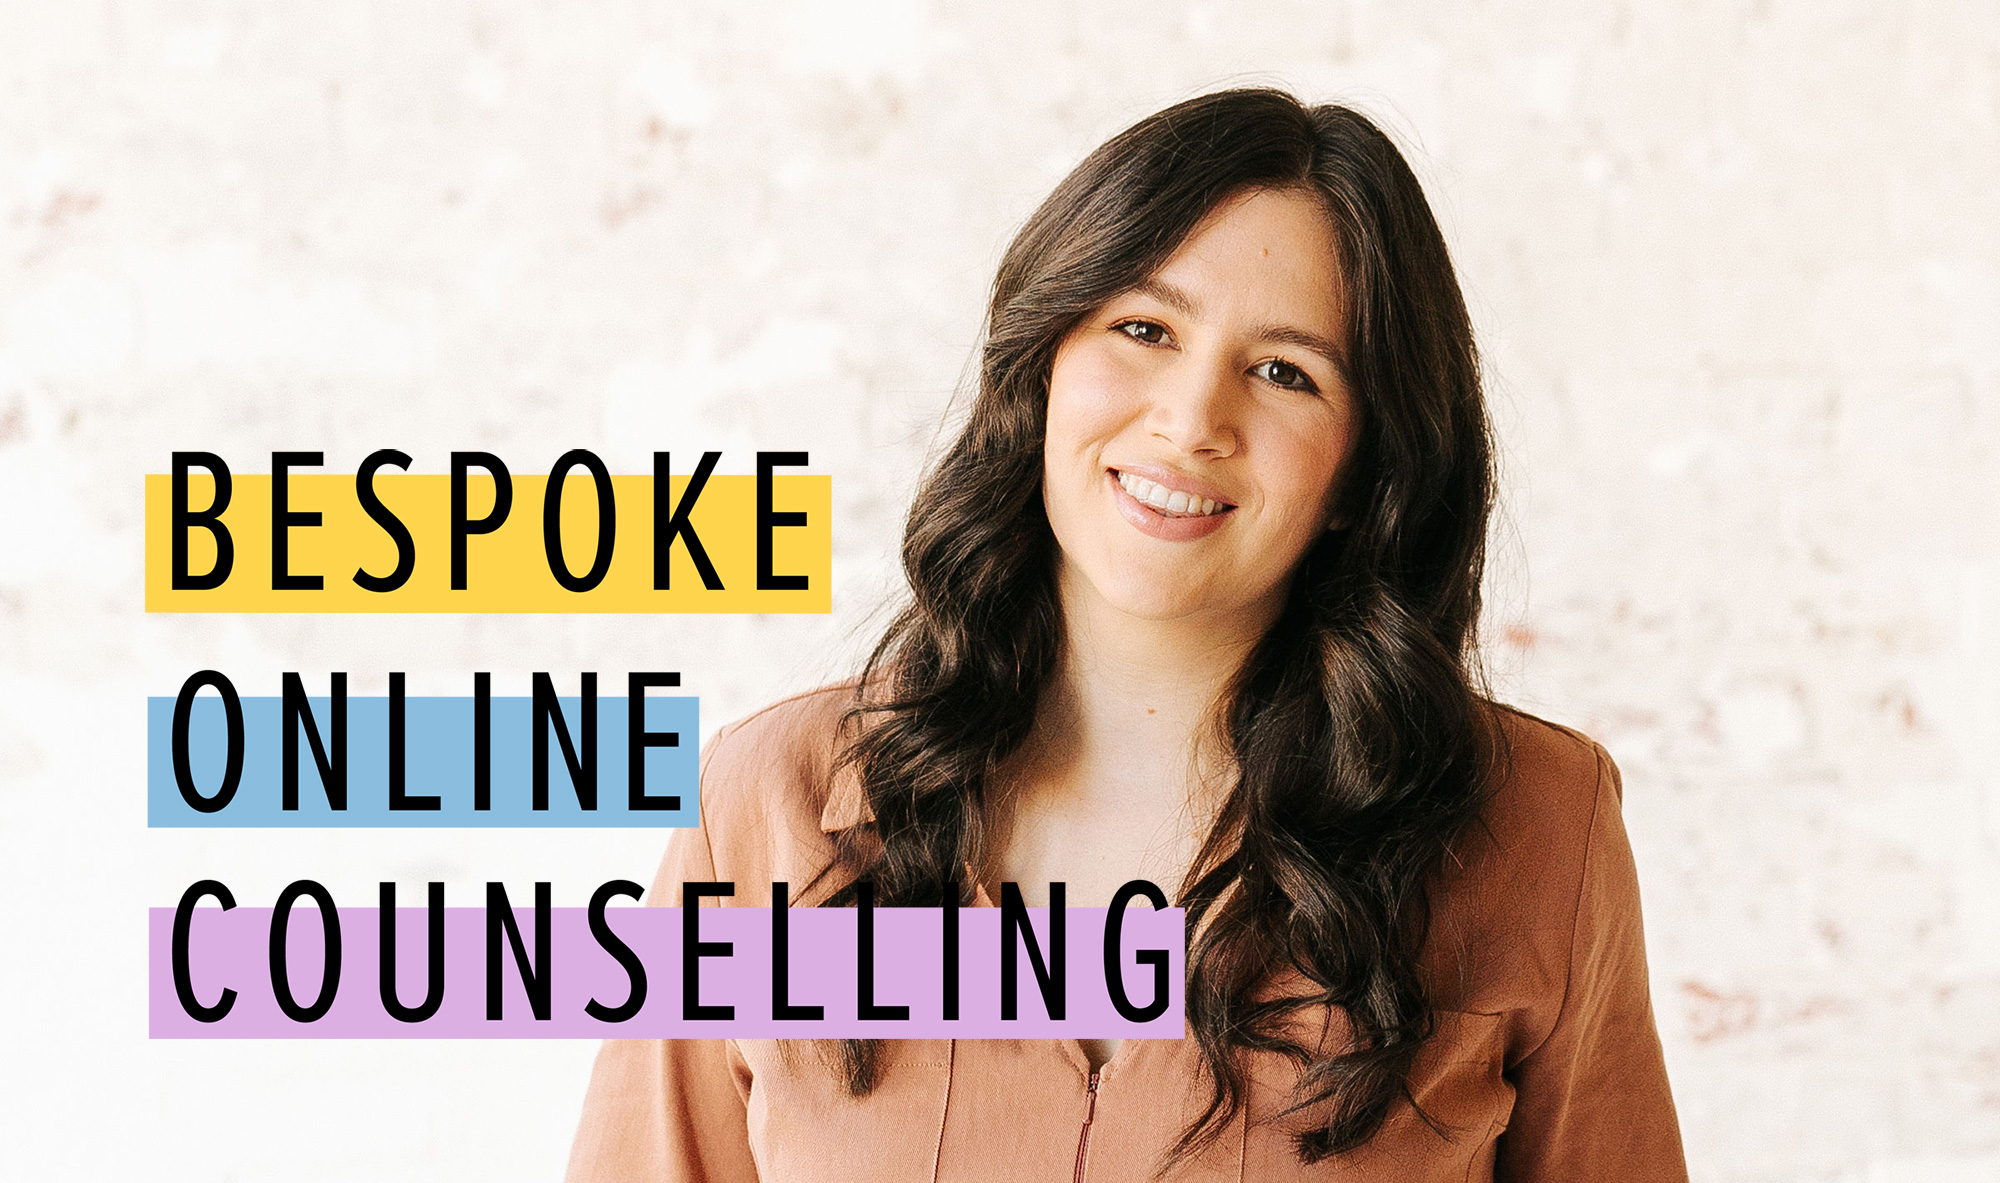 sit with self madeline bespoke online counselling service